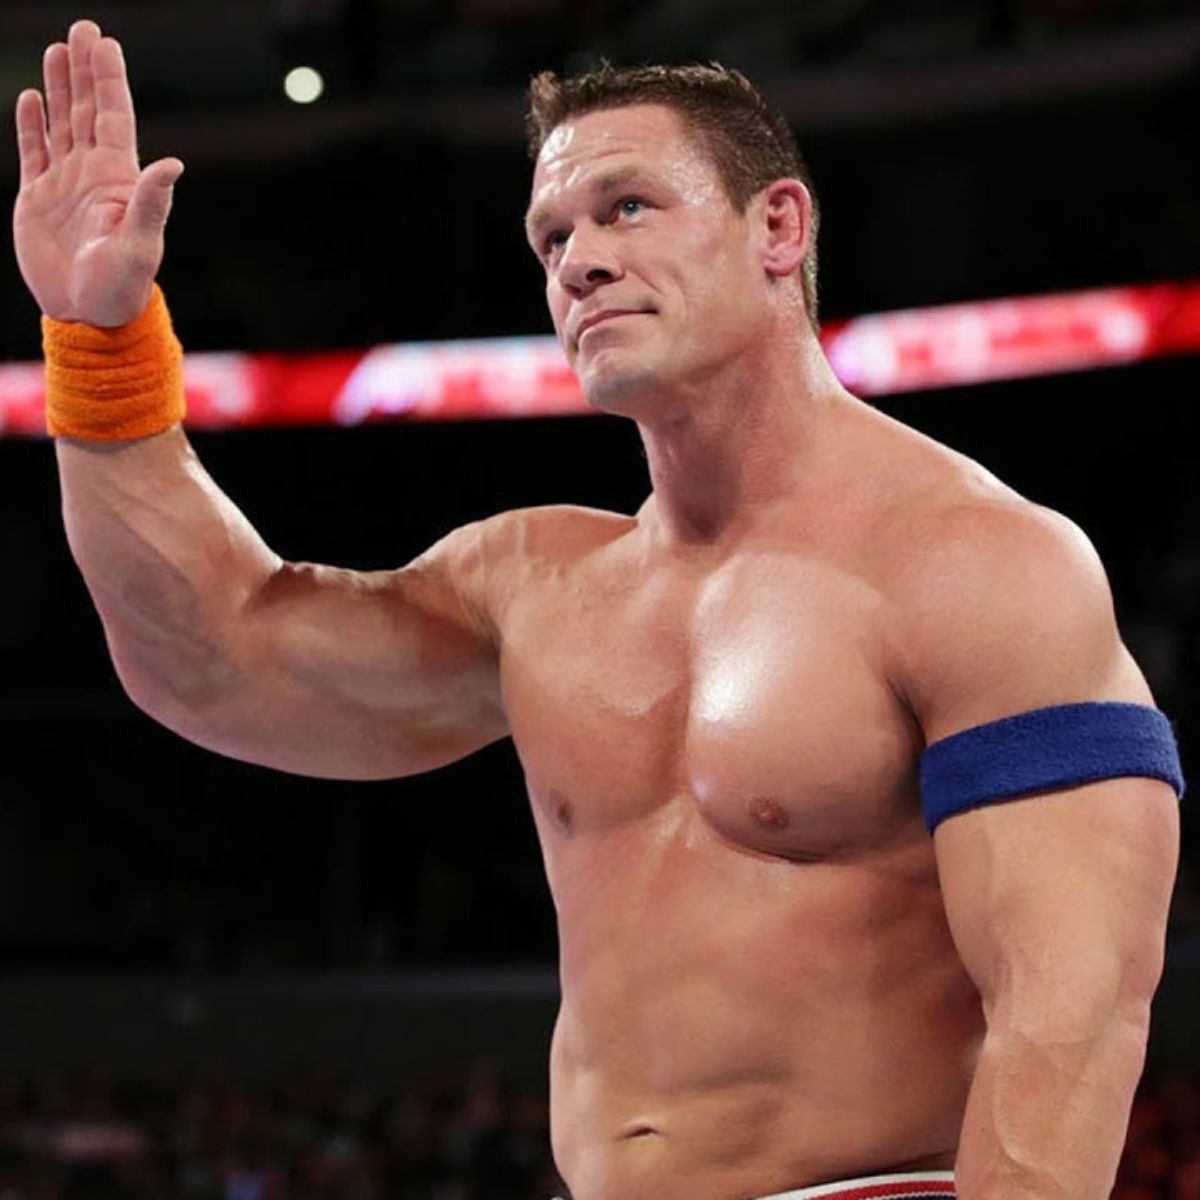 Will John Cena retire from WWE after Wrestlemania 36 match against